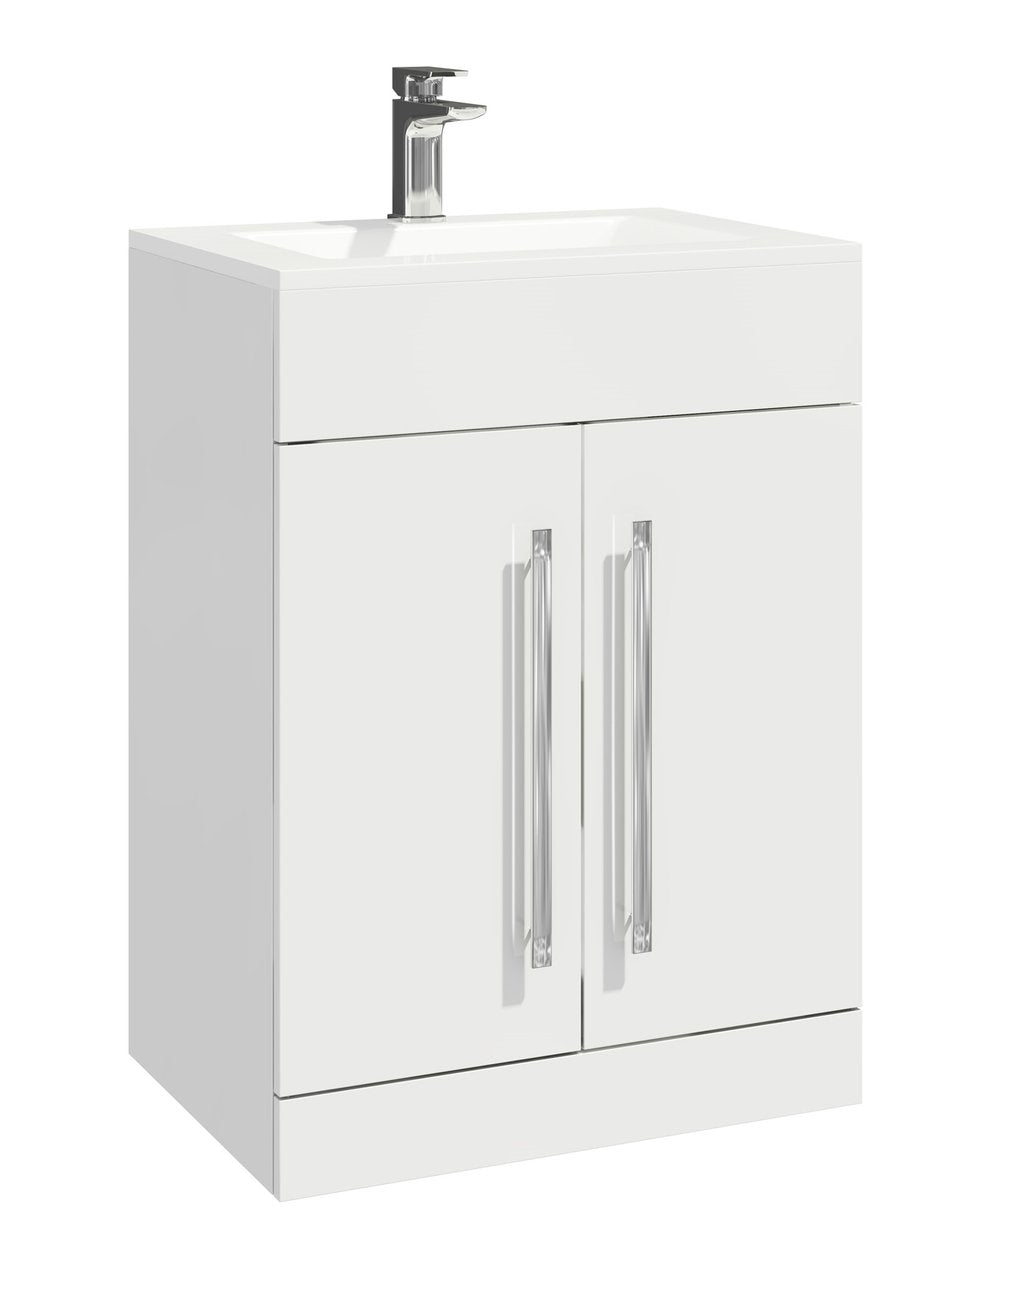 Lili 600mm Vanity Unit And Basin White Gloss Leeds Clearance Bathrooms